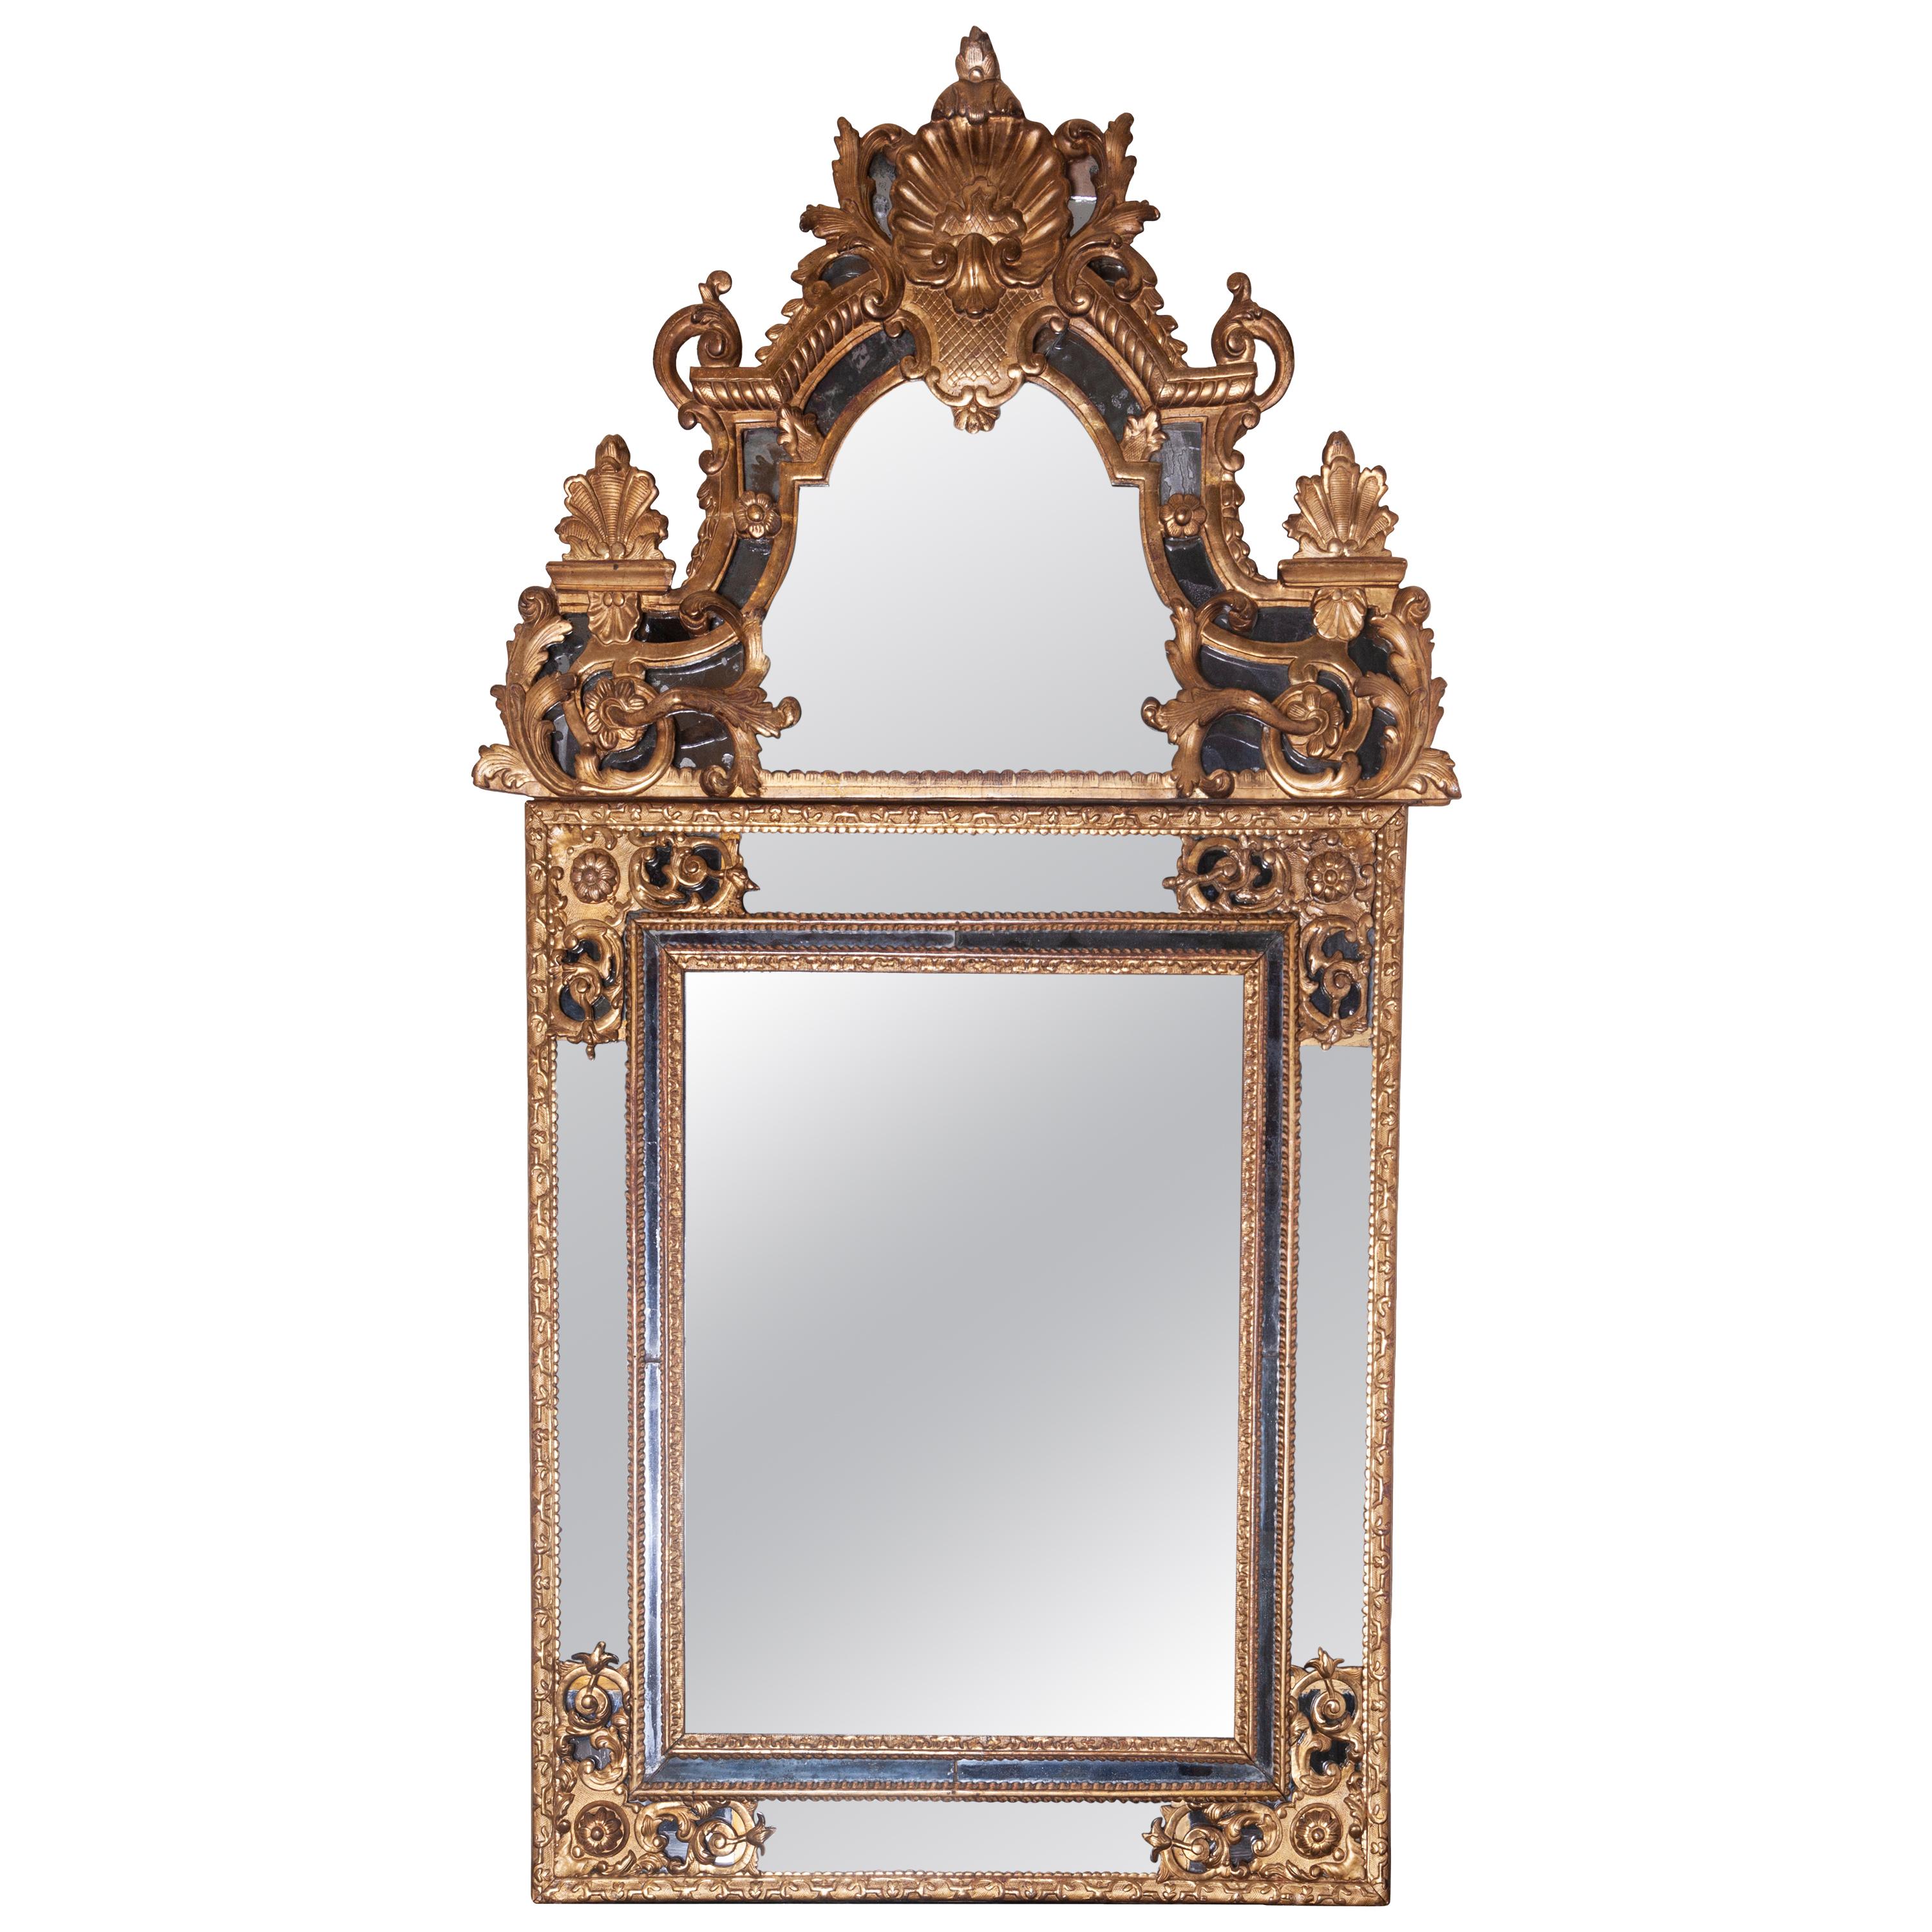 Early 18th Century Gold Regency Giltwood Mirror For Sale